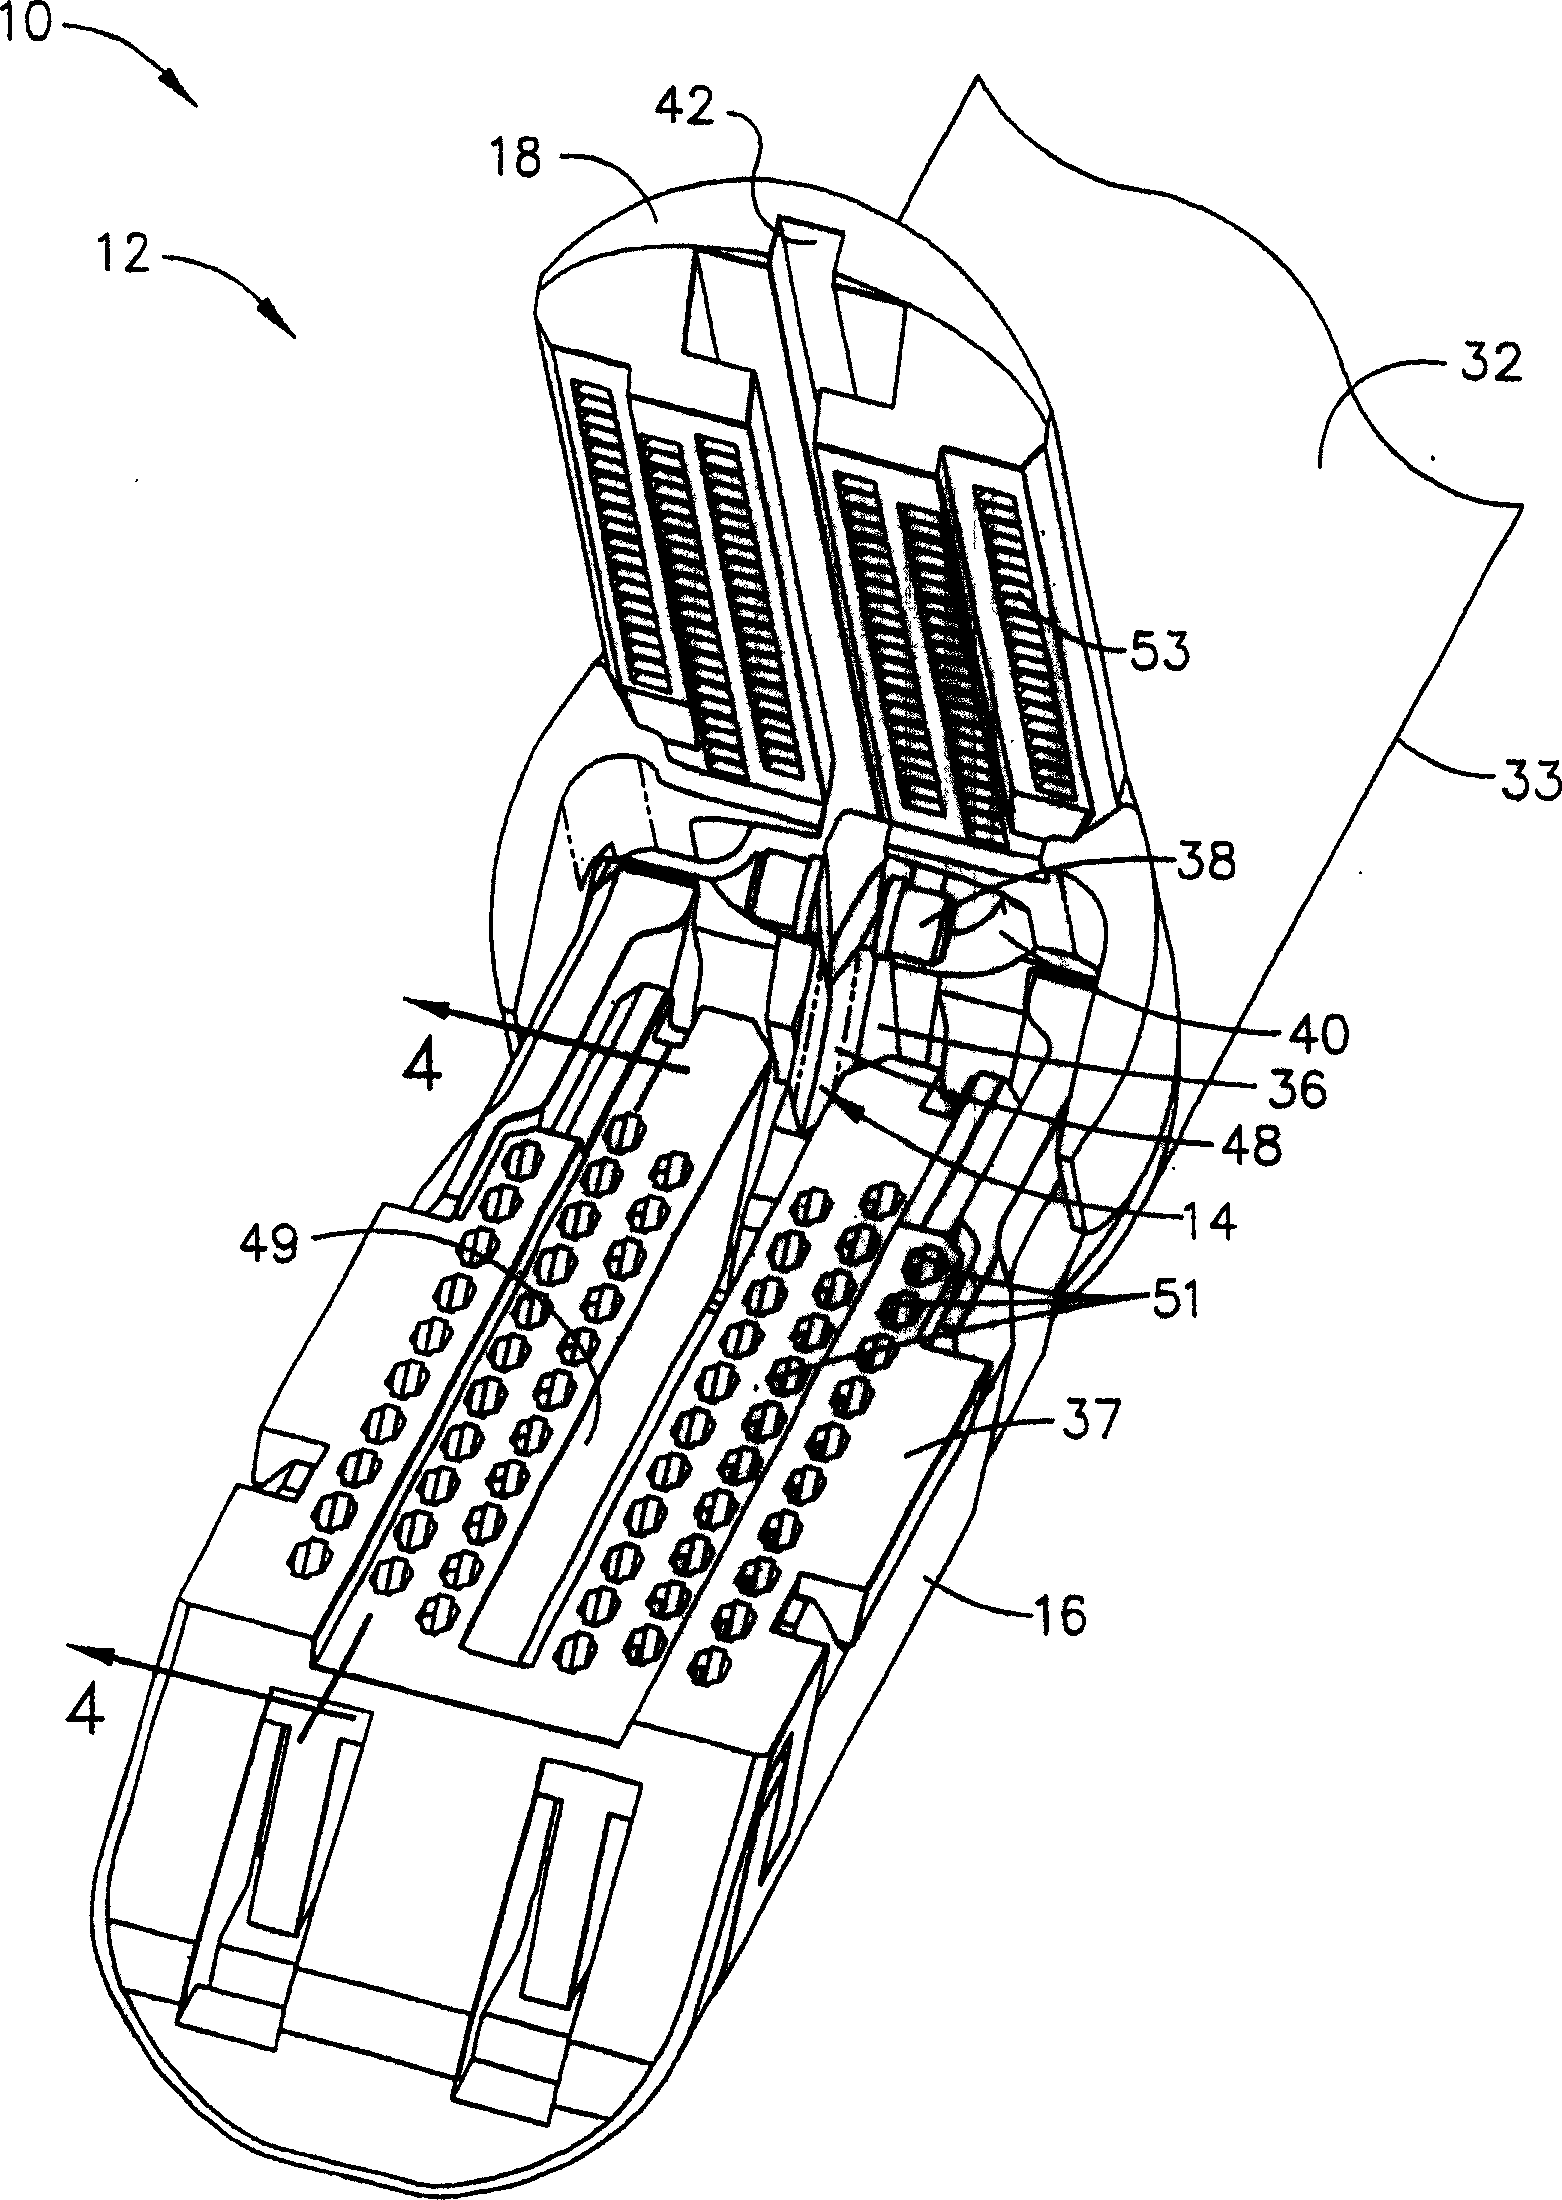 Surgical stapling instrument incorporating an articulation joint for a firing bar track